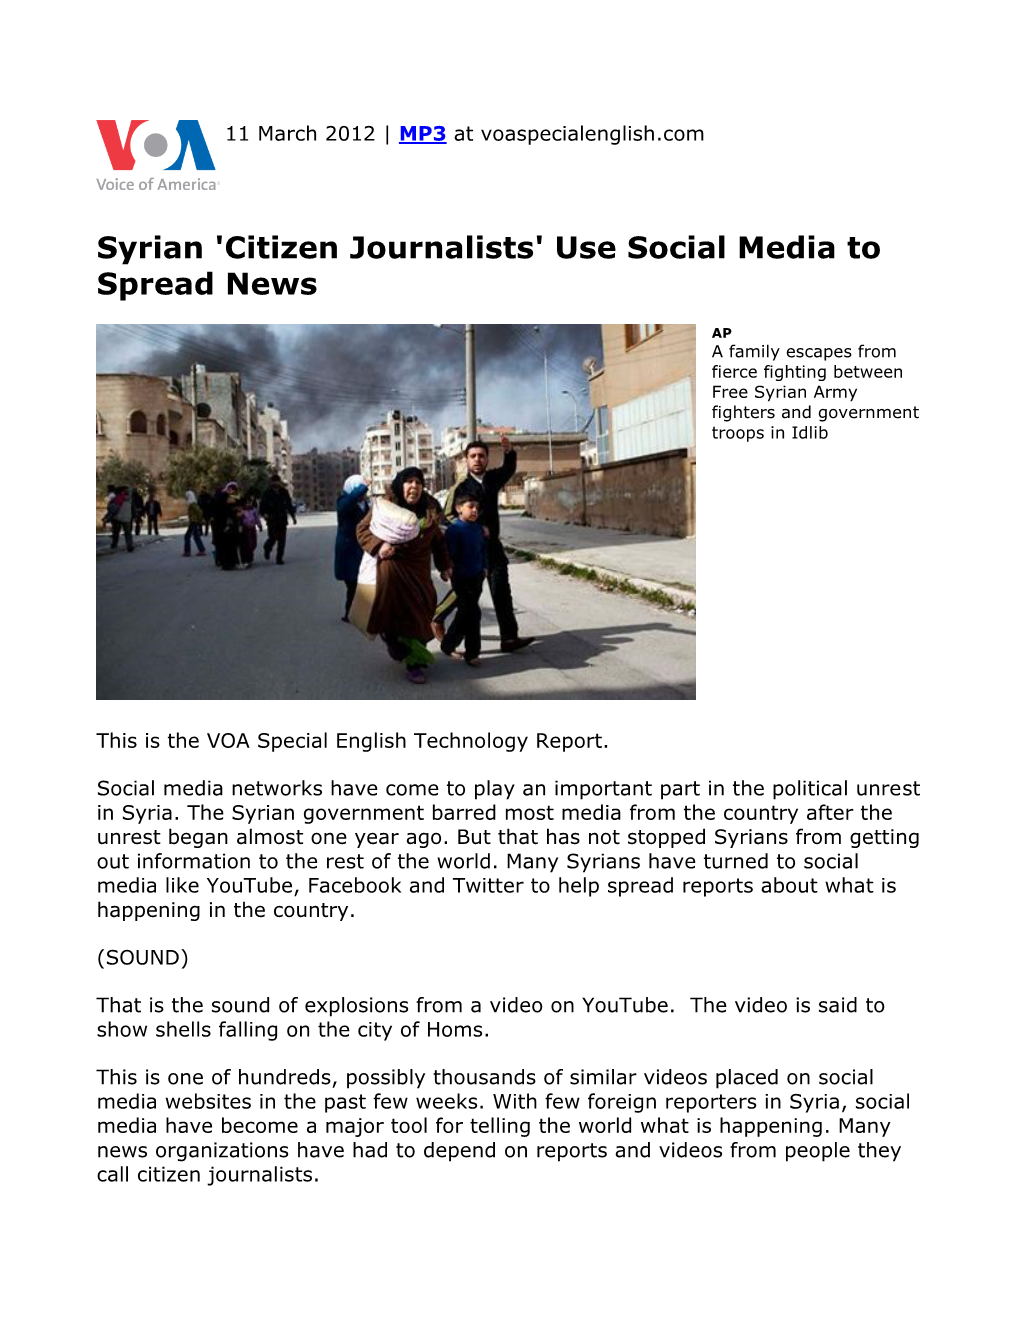 Syrian 'Citizen Journalists' Use Social Media to Spread News